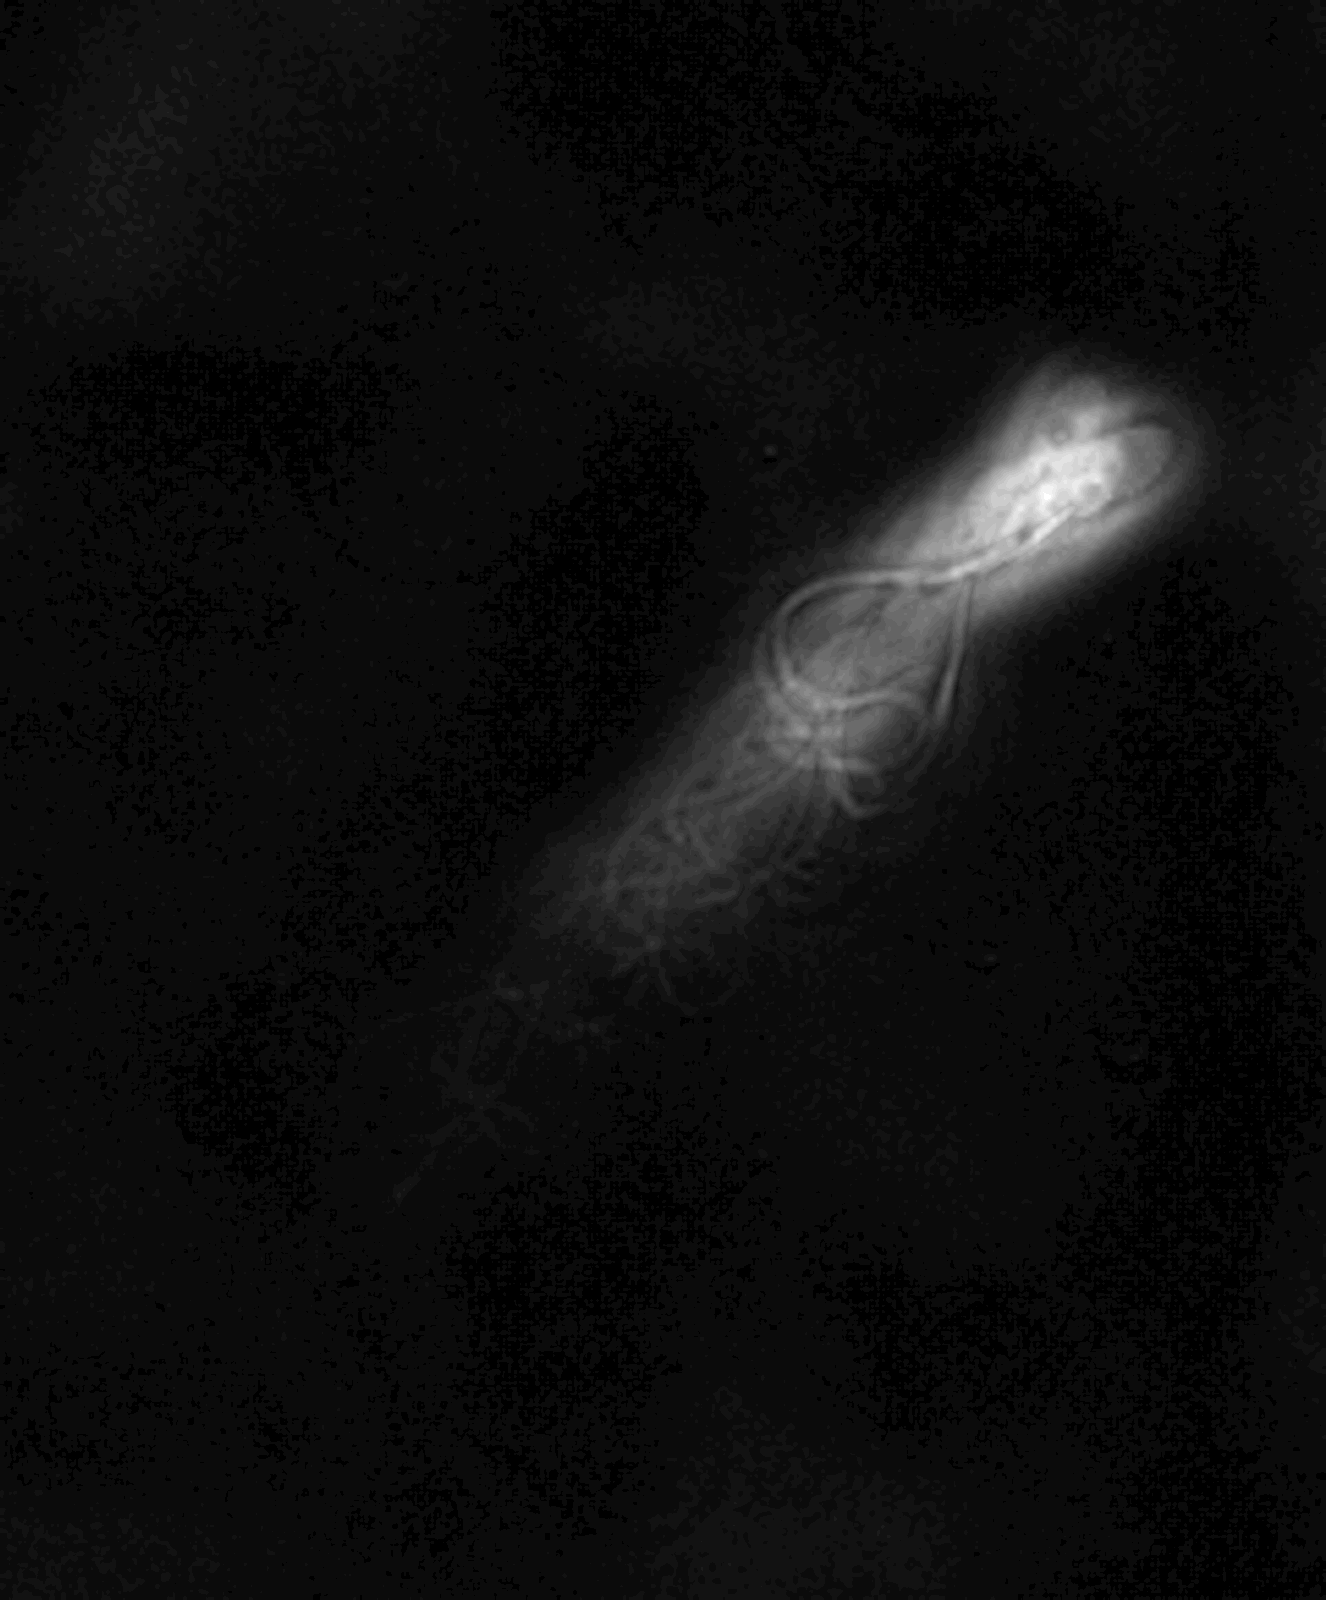 trajectory of sperm cell swimming upstream combined over several images